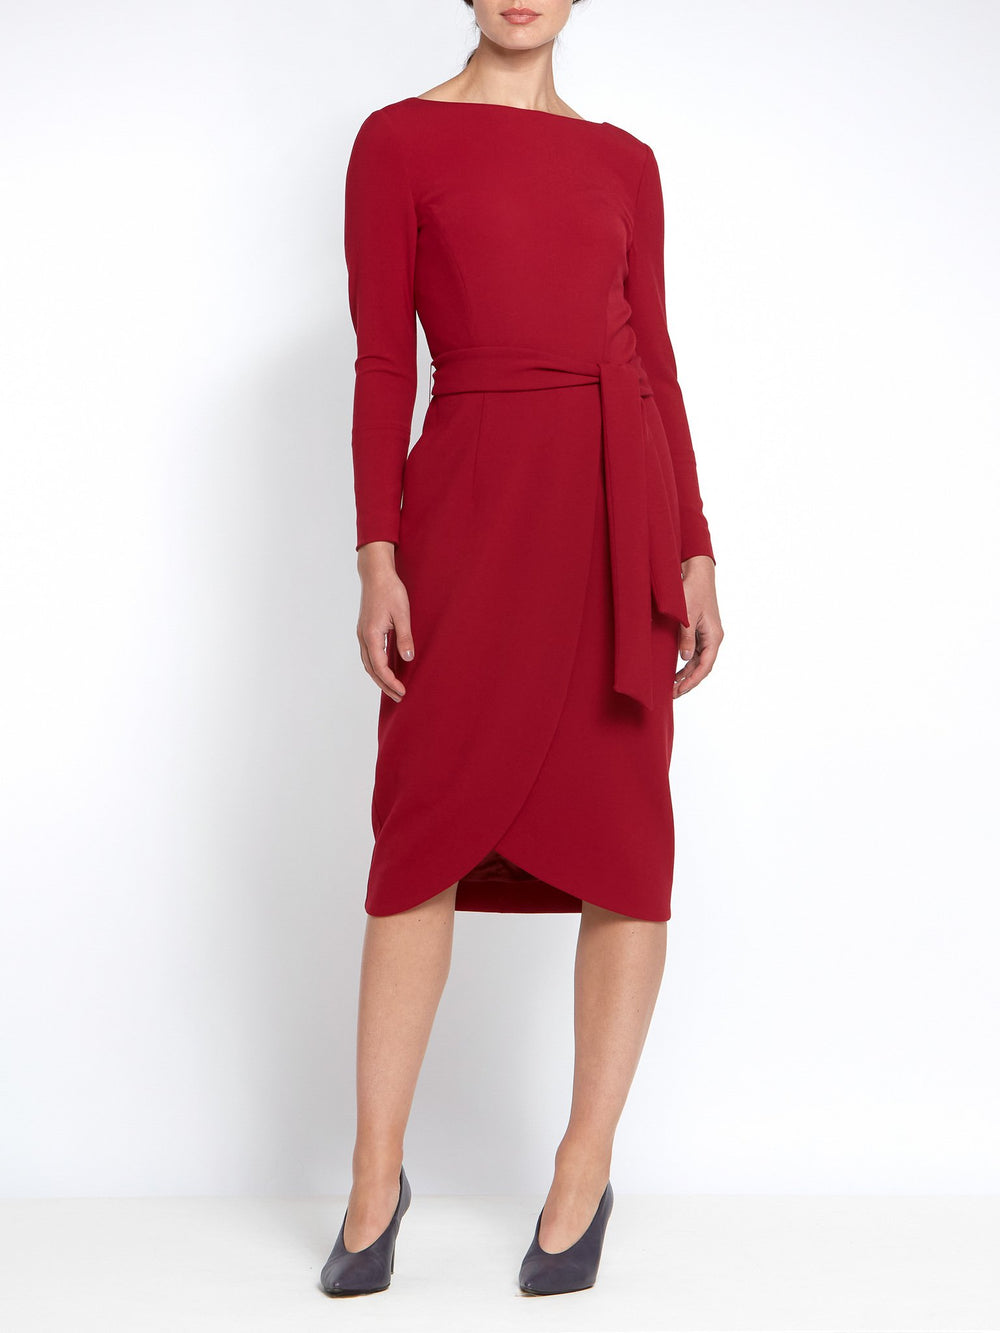 Helen McAlinden Celina ruby red dress A Body skimming silhouette with a slash neck and full length fitted sleeve with invisible zip detail. Occasion wear. Dress for women. Shop online dresses from irish designer. Evening dresses.